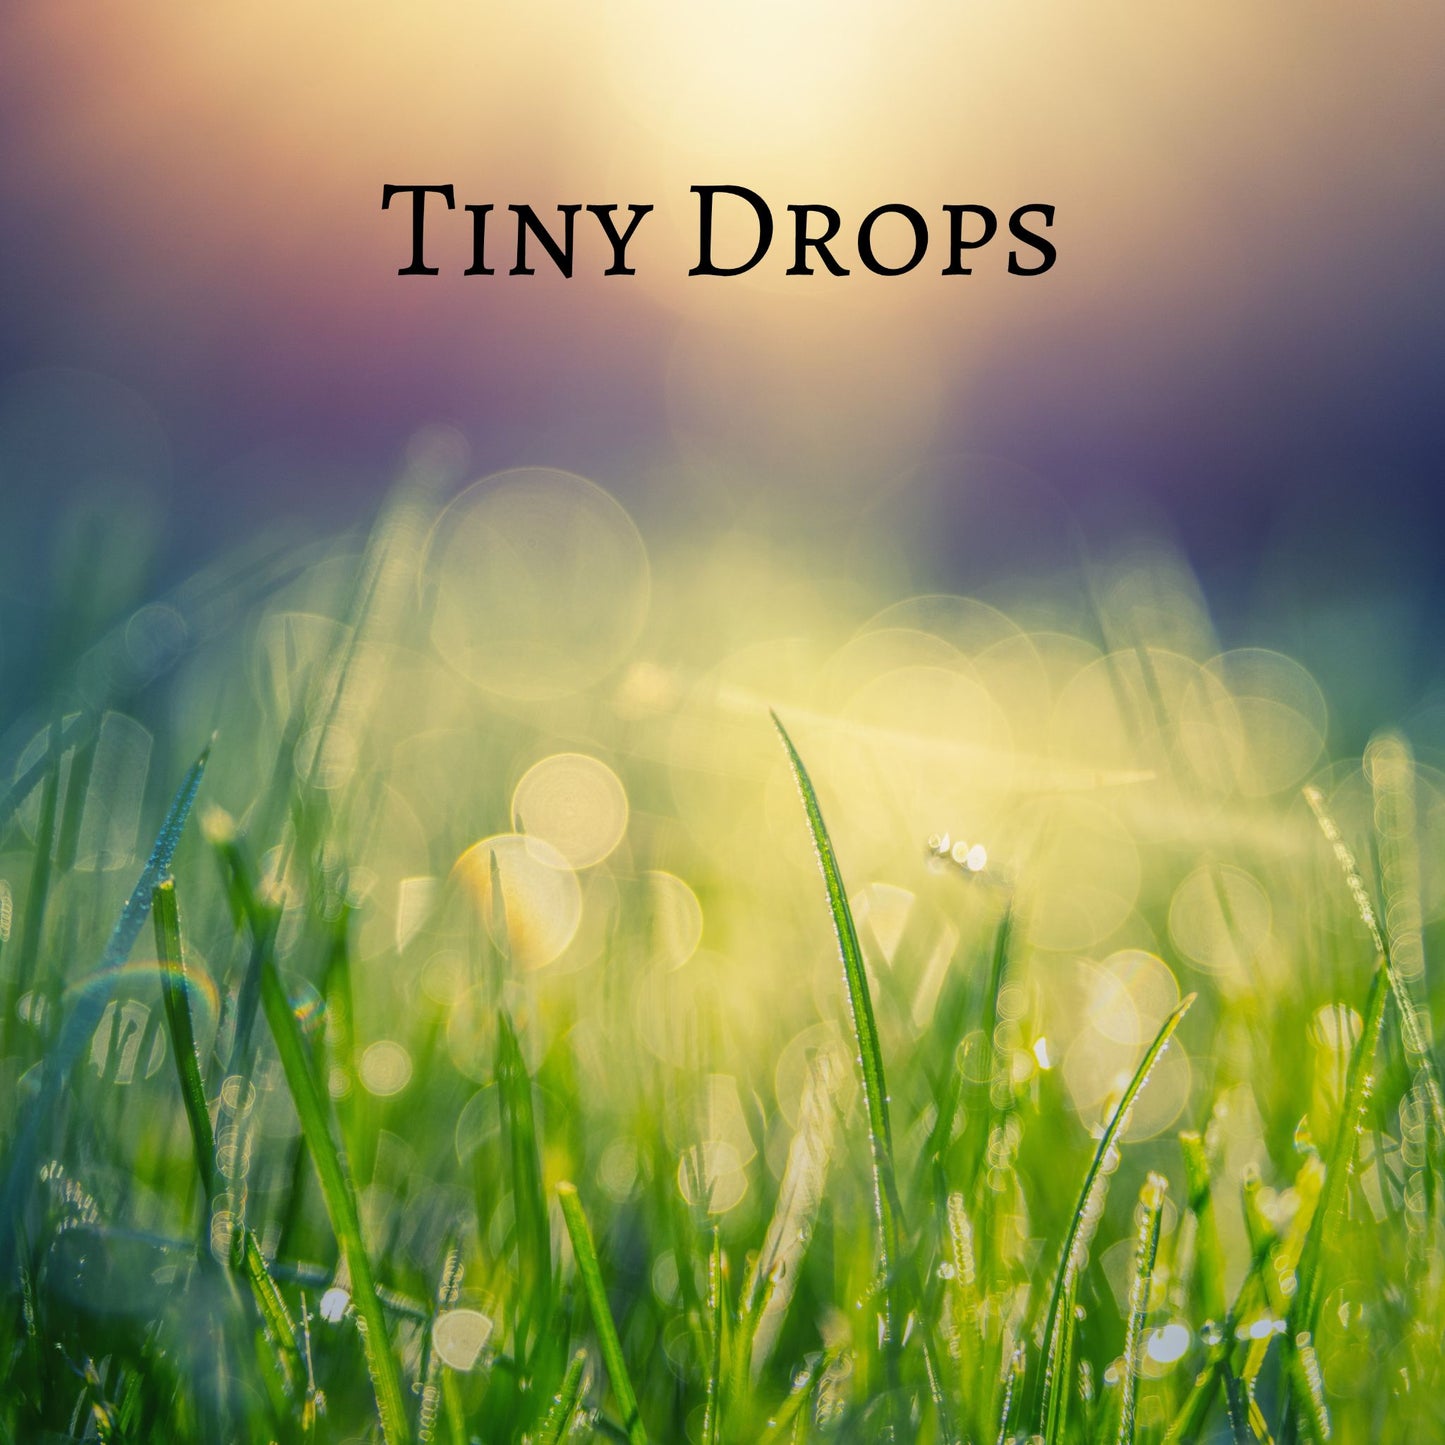 CD Cover of song Tiny Drops